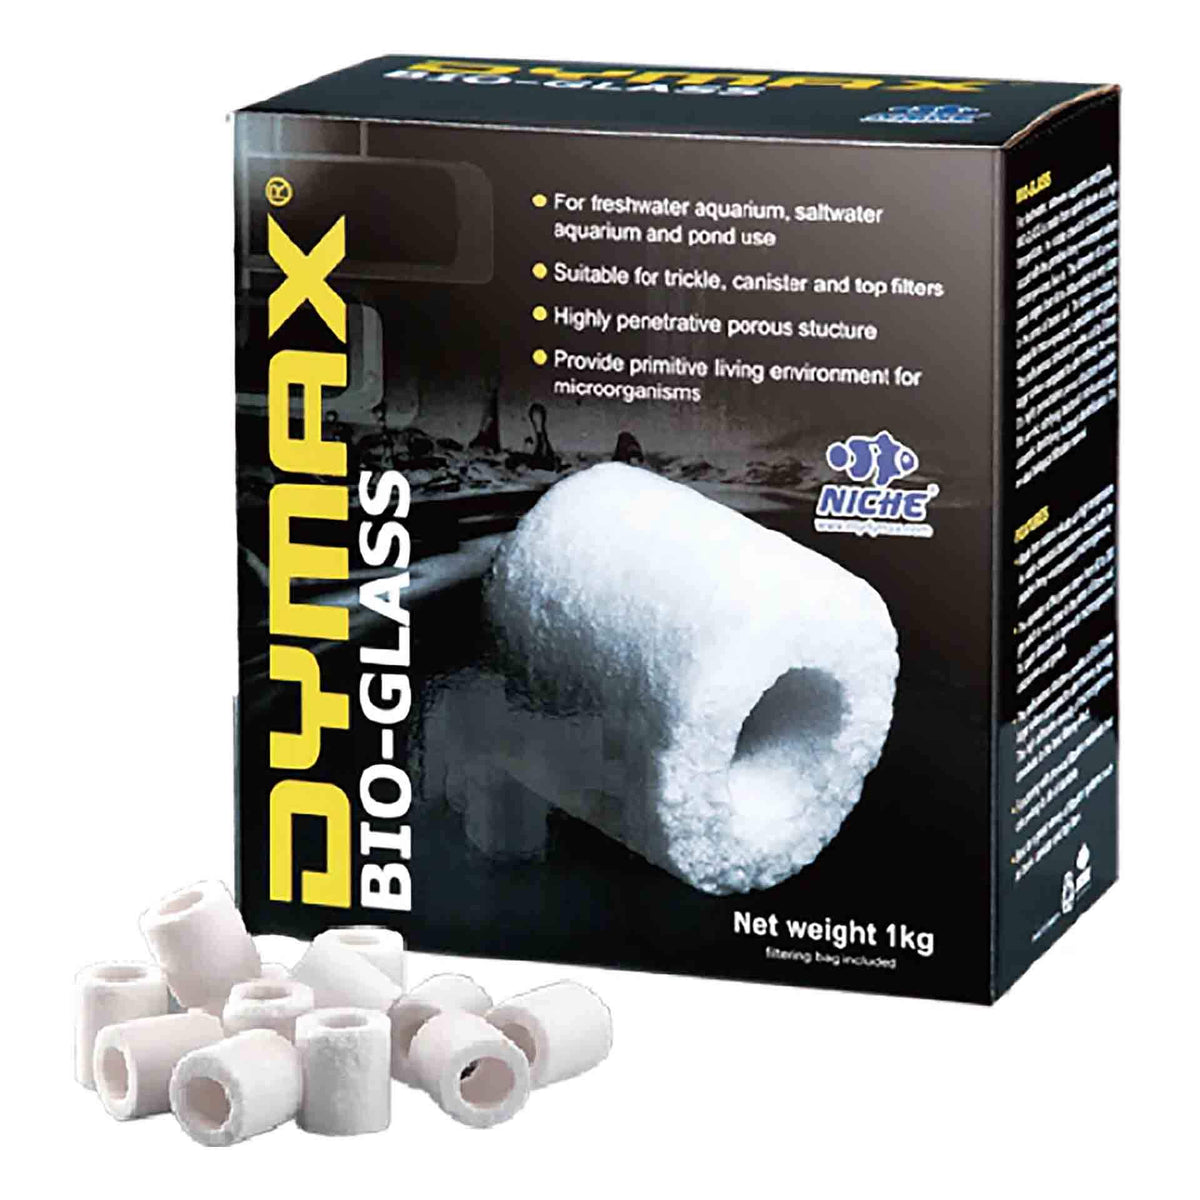 Dymax Bio-Glass 1Kg - Suitable for Freshwater, Saltwater and Pond Use